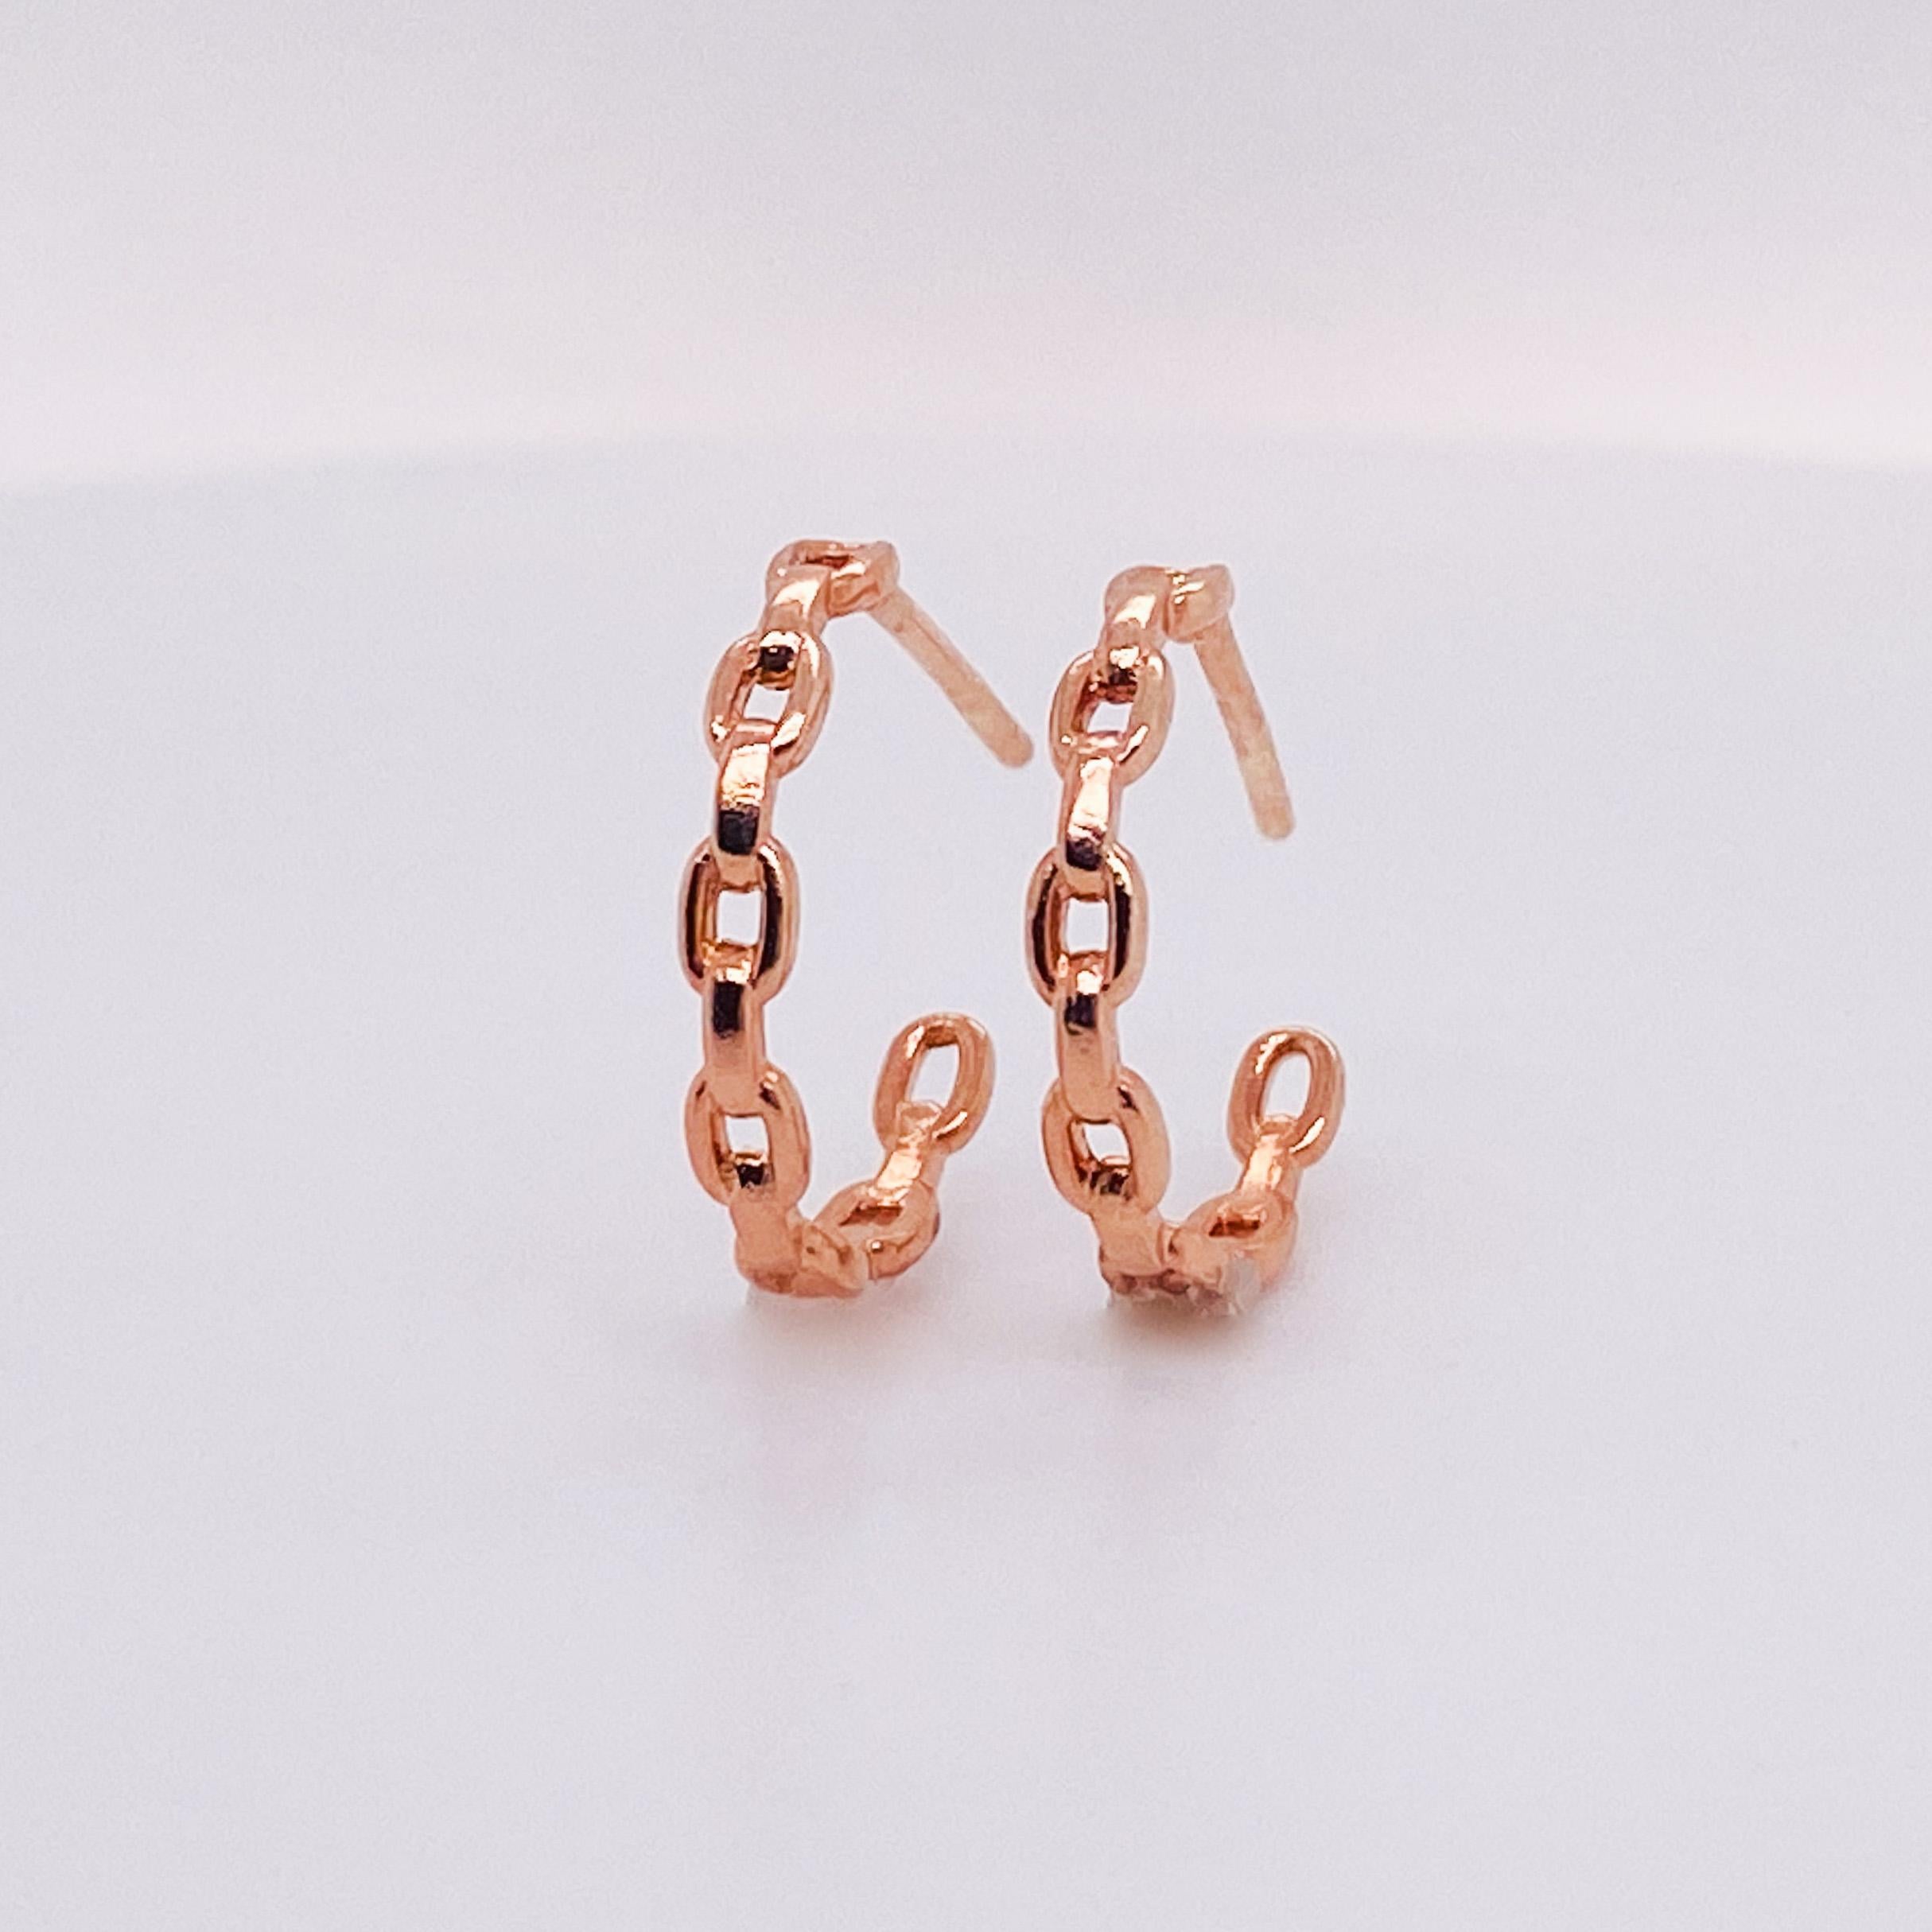 Contemporary Cable Link Hoop Earrings Sleek 15 mm Diameter by 2.3 mm in 14K Rose Gold LV  For Sale